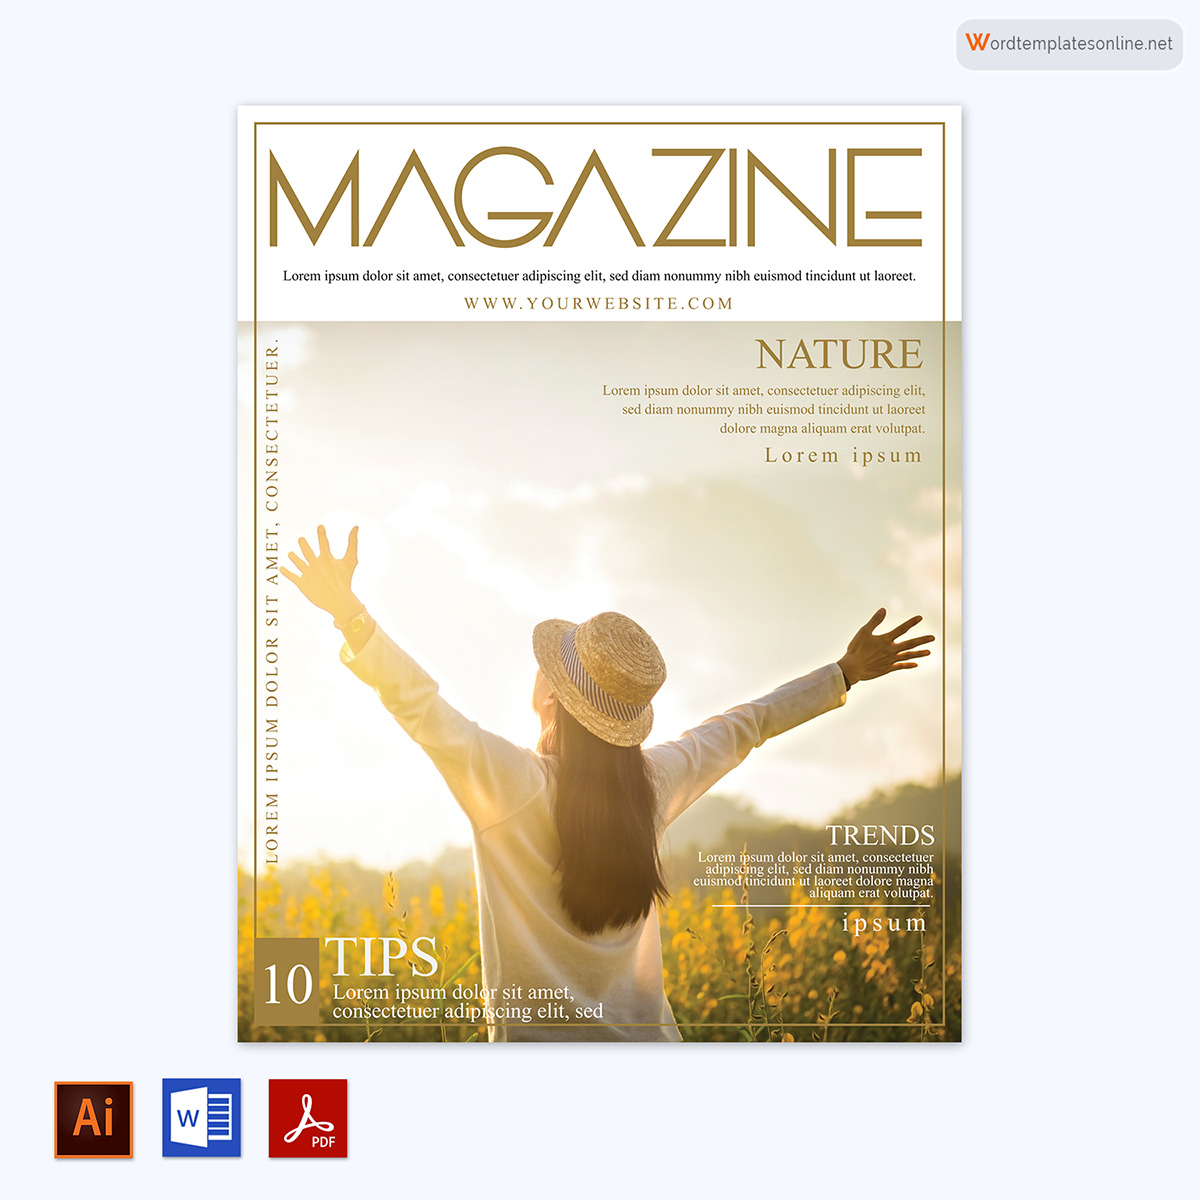  magazine template free download